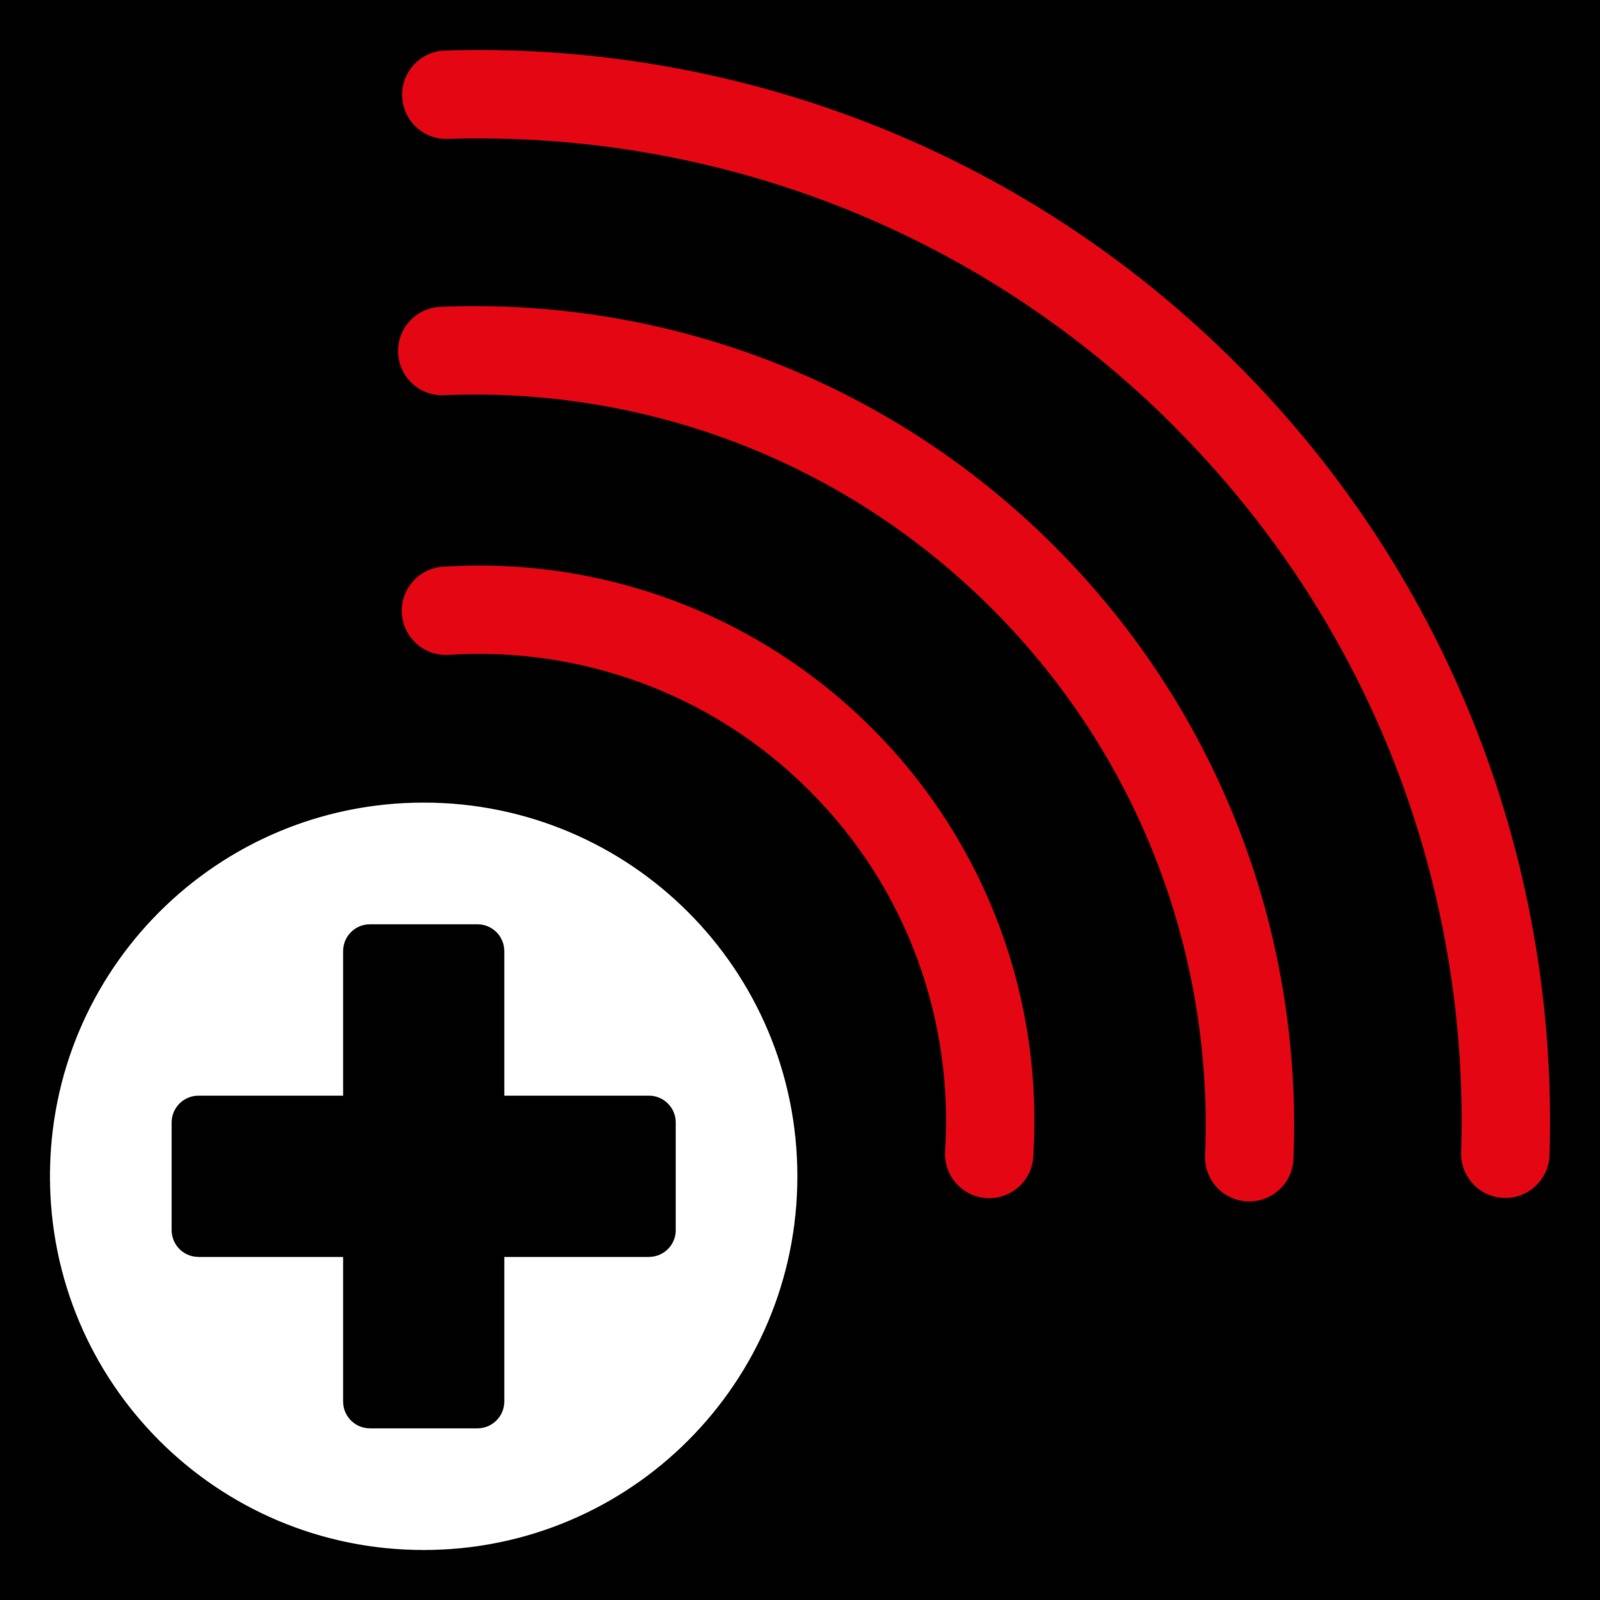 Medical Source vector icon. Style is bicolor flat symbol, red and white colors, rounded angles, black background.